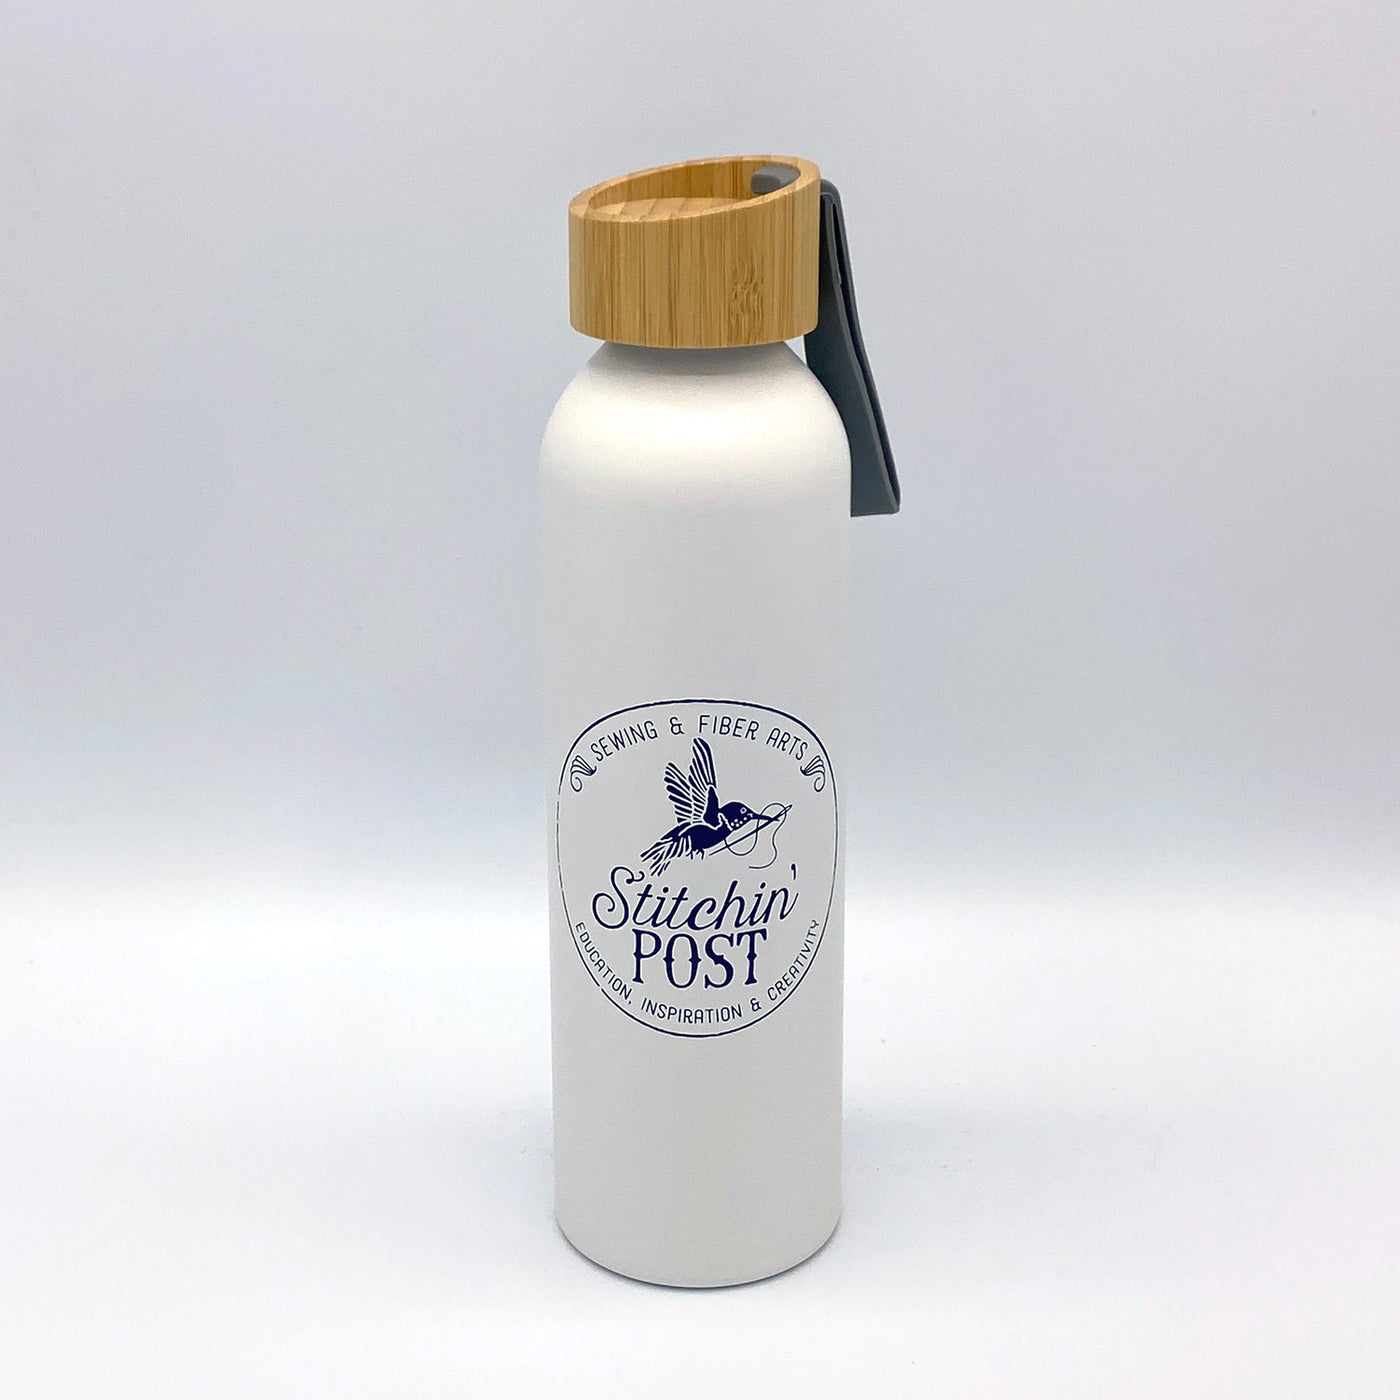 22 oz Aluminum Water Bottle from Stitchin' Post